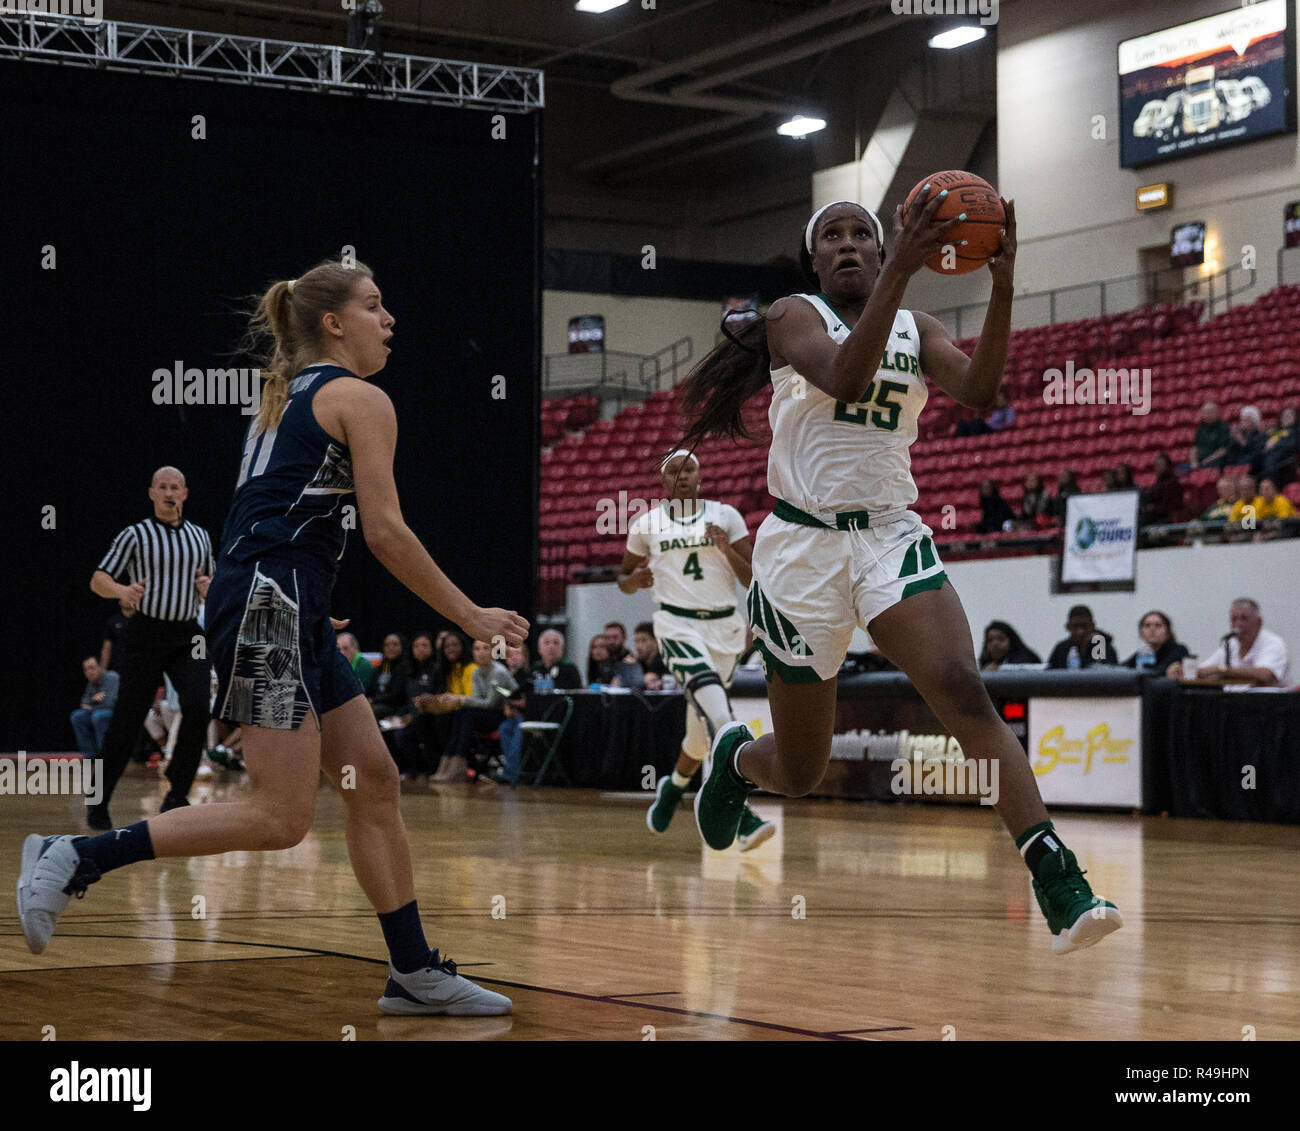 Nov 24 2018 Las Vegas, NV U.S.A. Baylor center Queen Egbo (25) drives to the basket during the NCAA Women's Basketball Thanksgiving Shootout between Baylor Bears and the Georgetown Hoyas 67-46 win at South Point Arena Las Vegas, NV. Thurman James/CSM Stock Photo